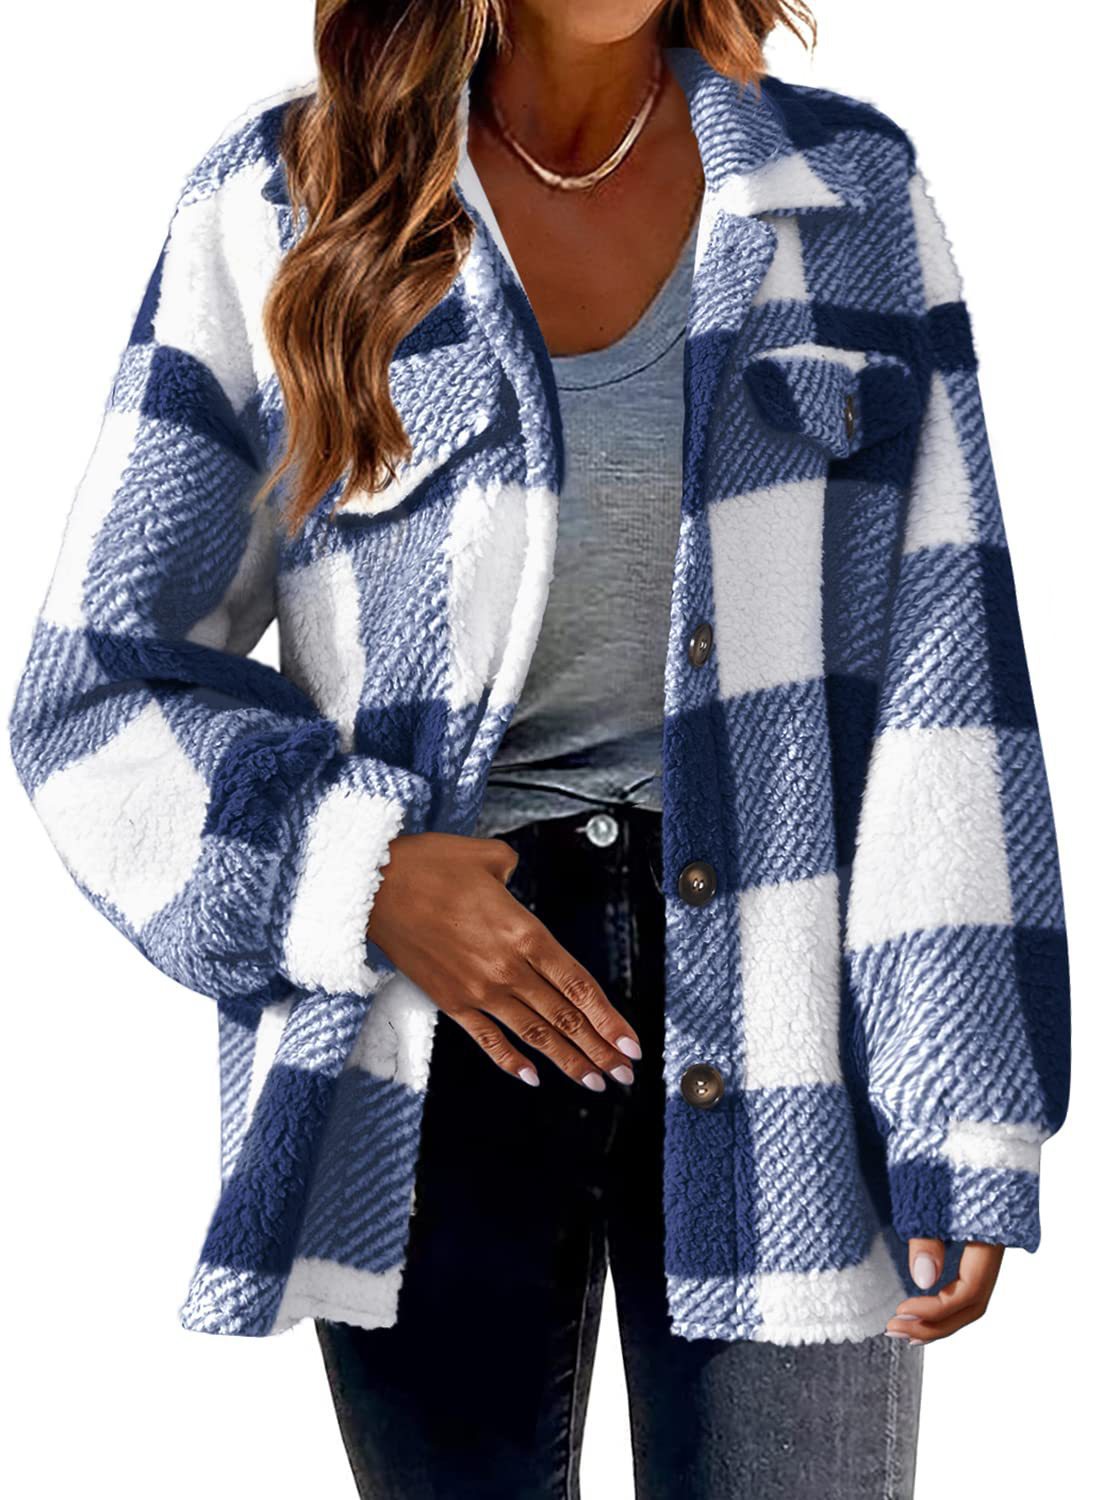 Turndown Collar Plaid Jacket With Pockets Single Breasted Button Down Woolen Jacket Autumn And Winter Clothes For Women - Fashioinista